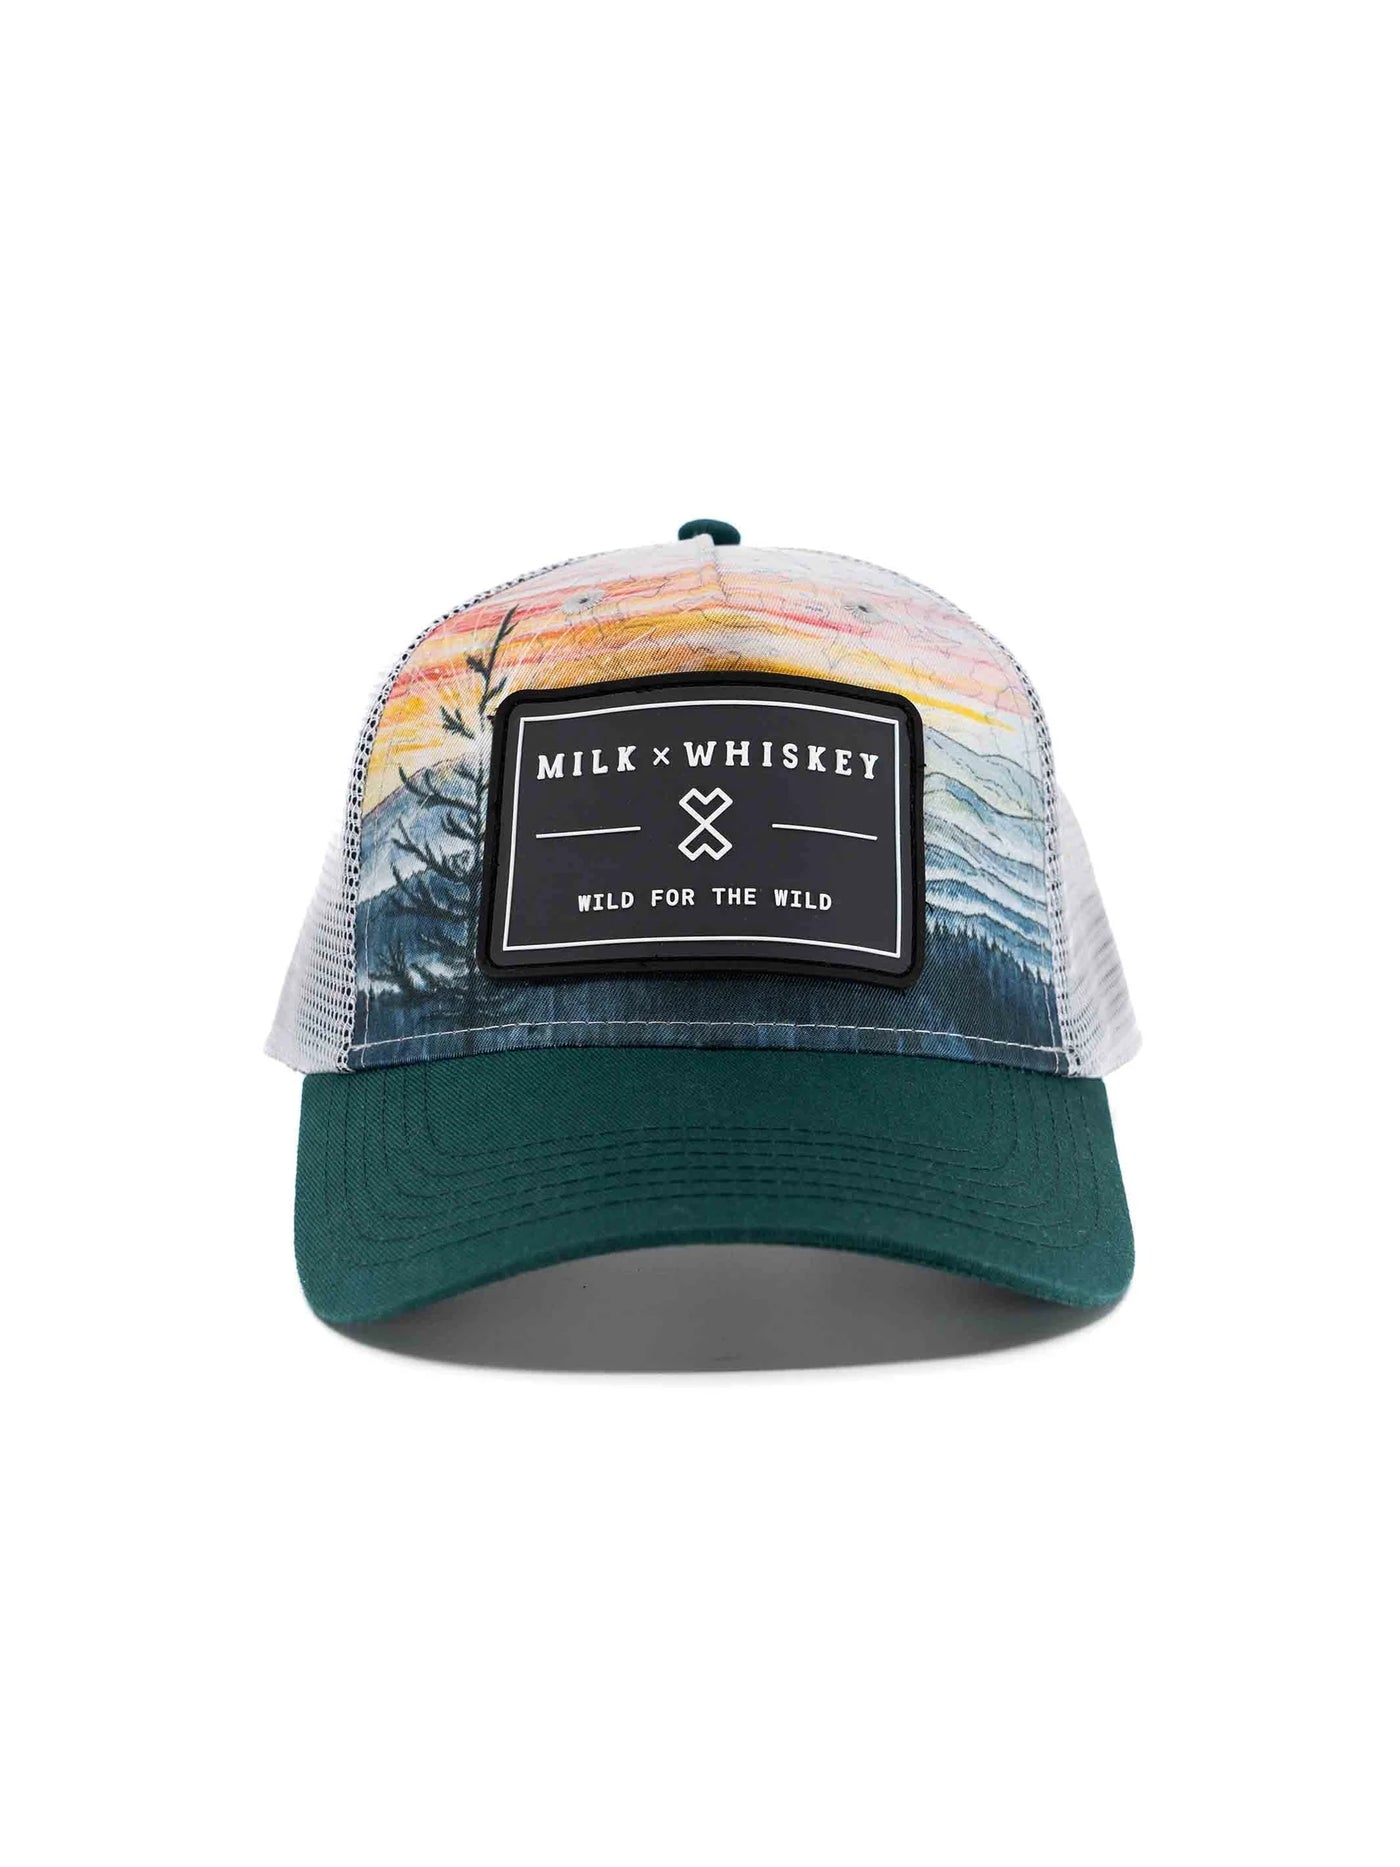 Wild For The Wild - Low Pro Forest Trucker